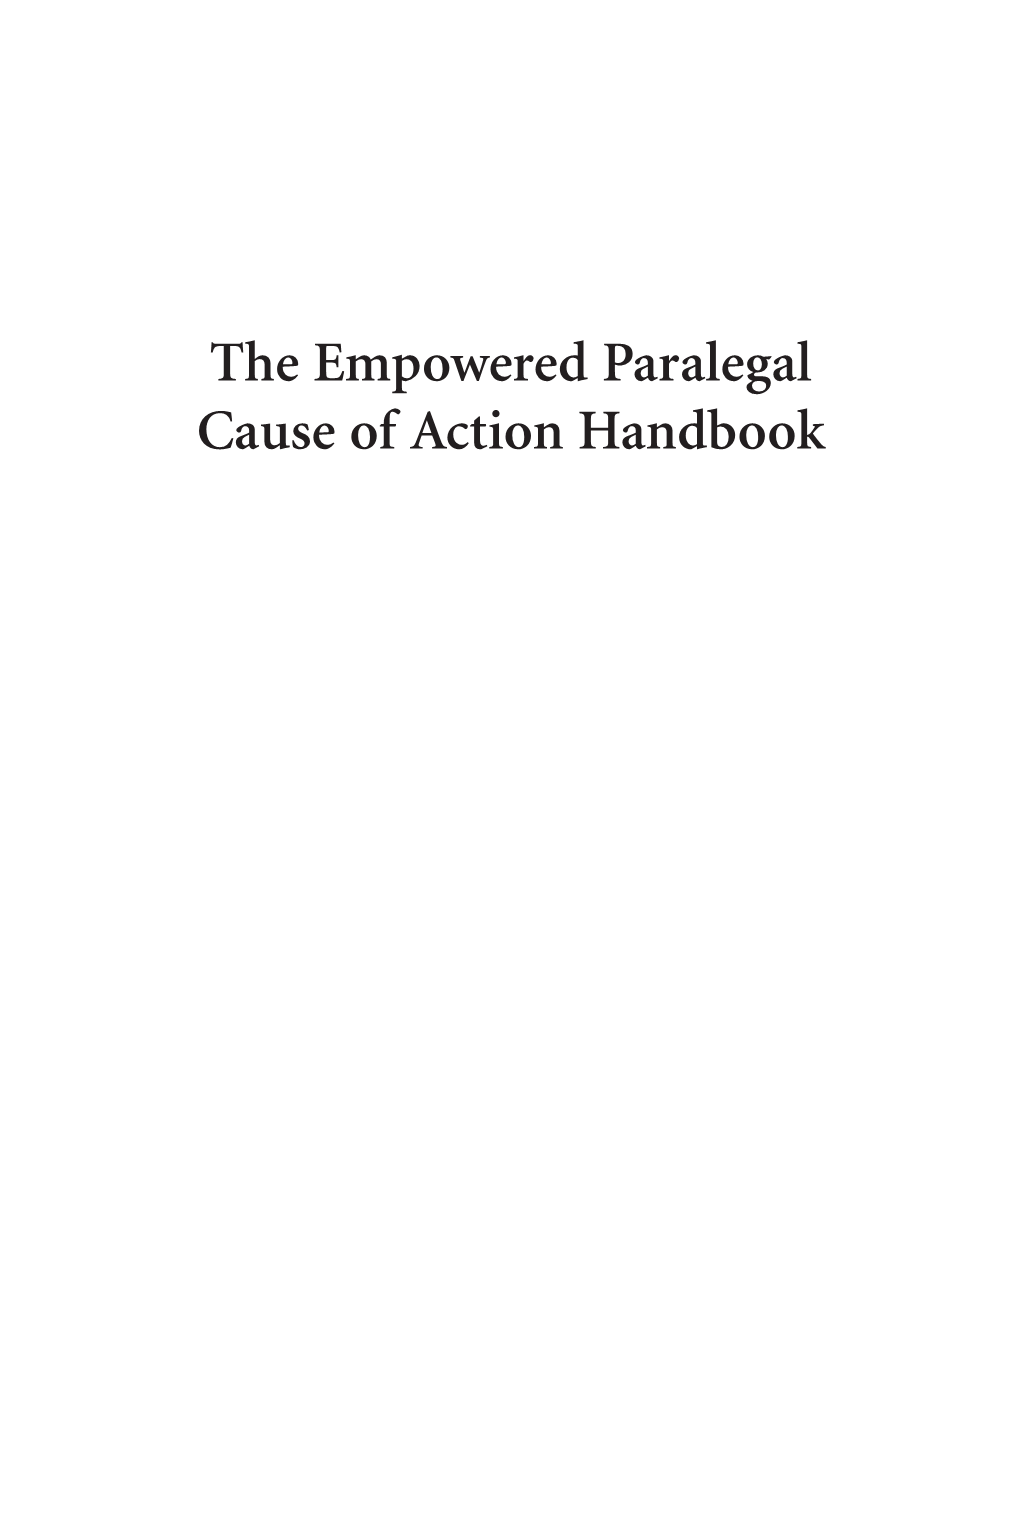 The Empowered Paralegal Cause of Action Handbook Mongue 00 Fmt Cx2 2/3/14 12:23 PM Page Ii